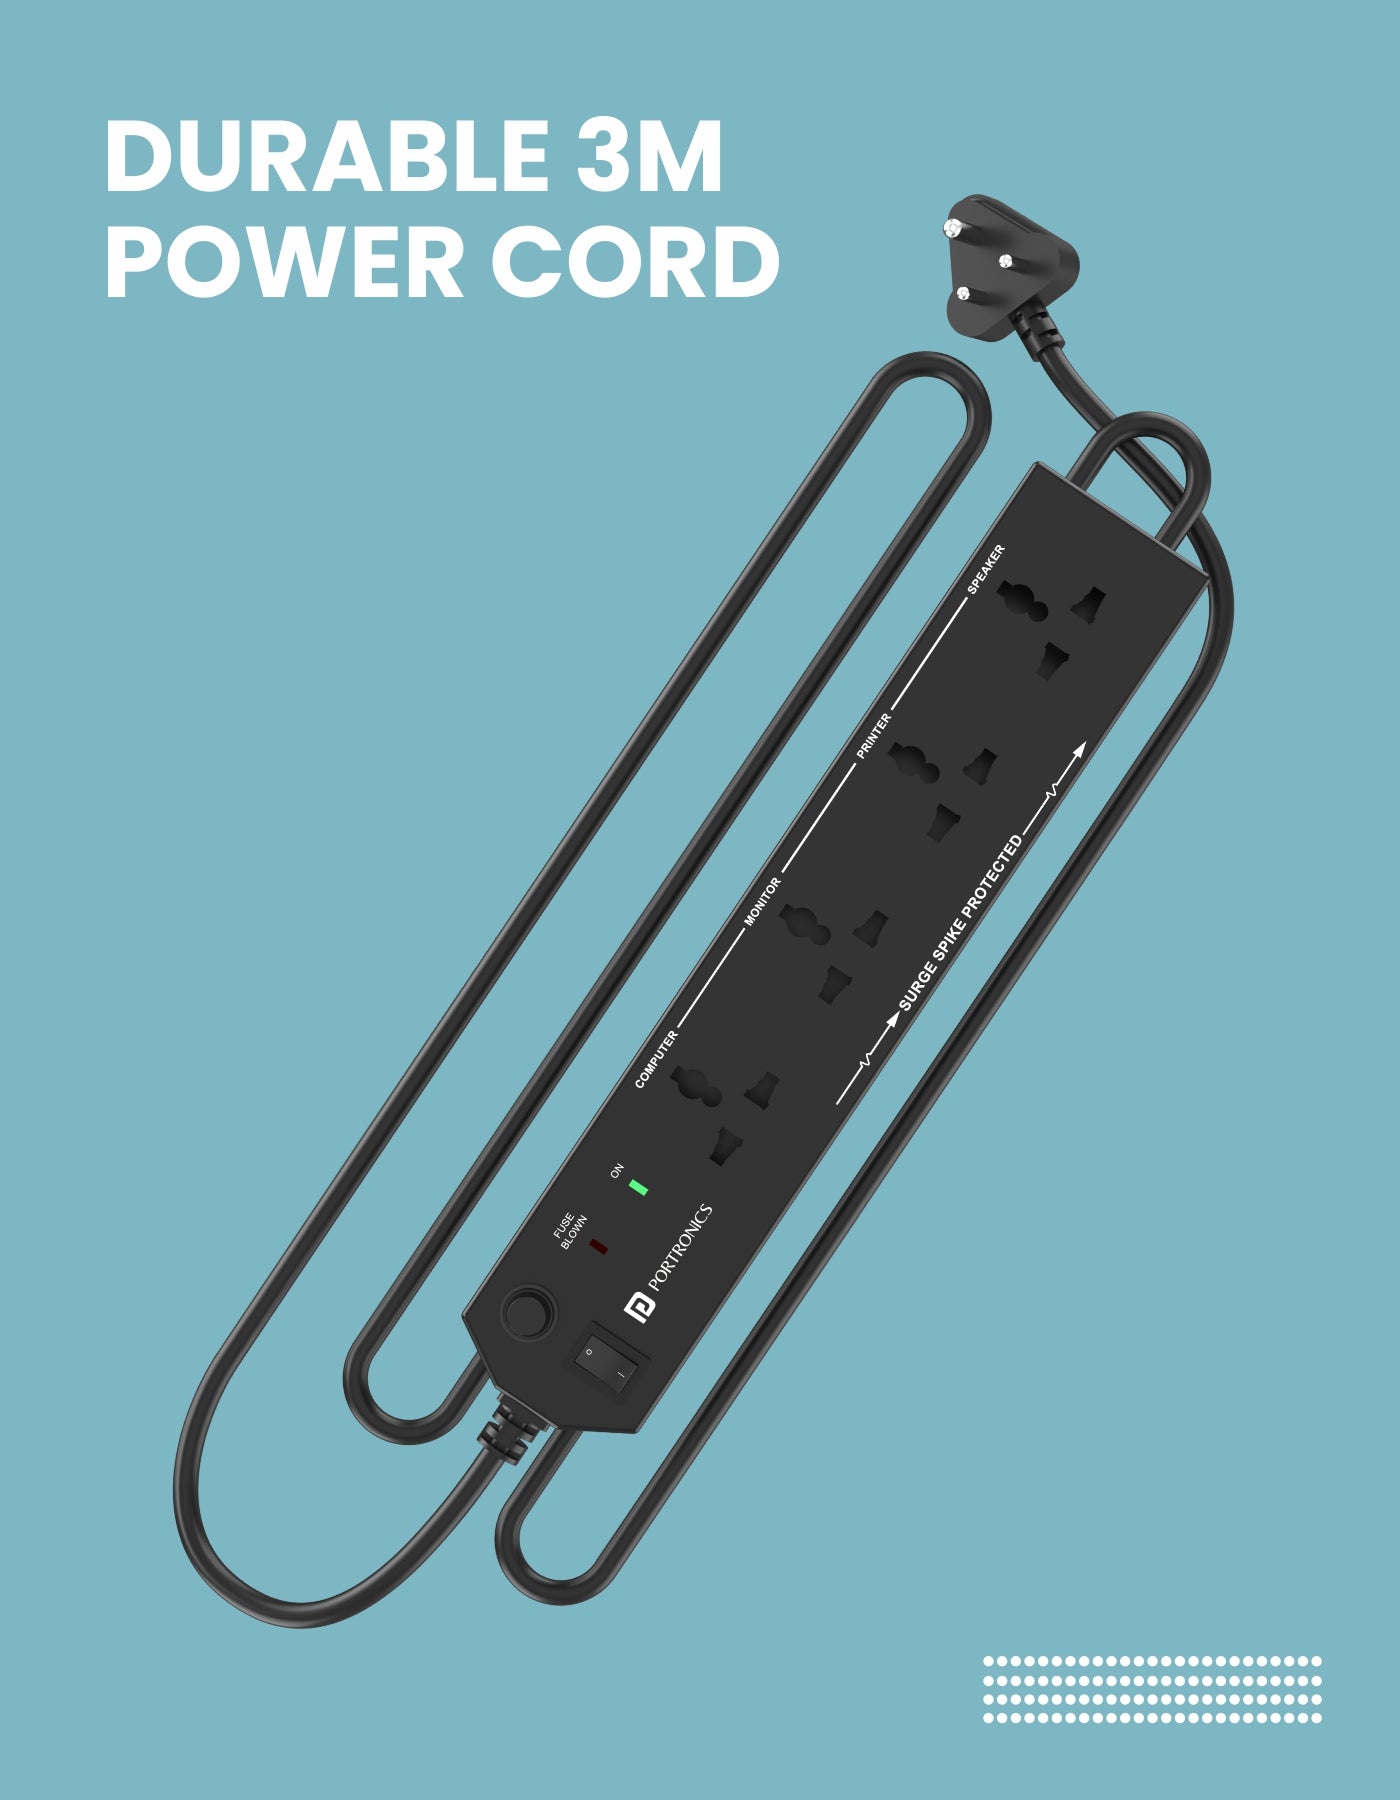 Durable 3M power cord in portronics power plate 10